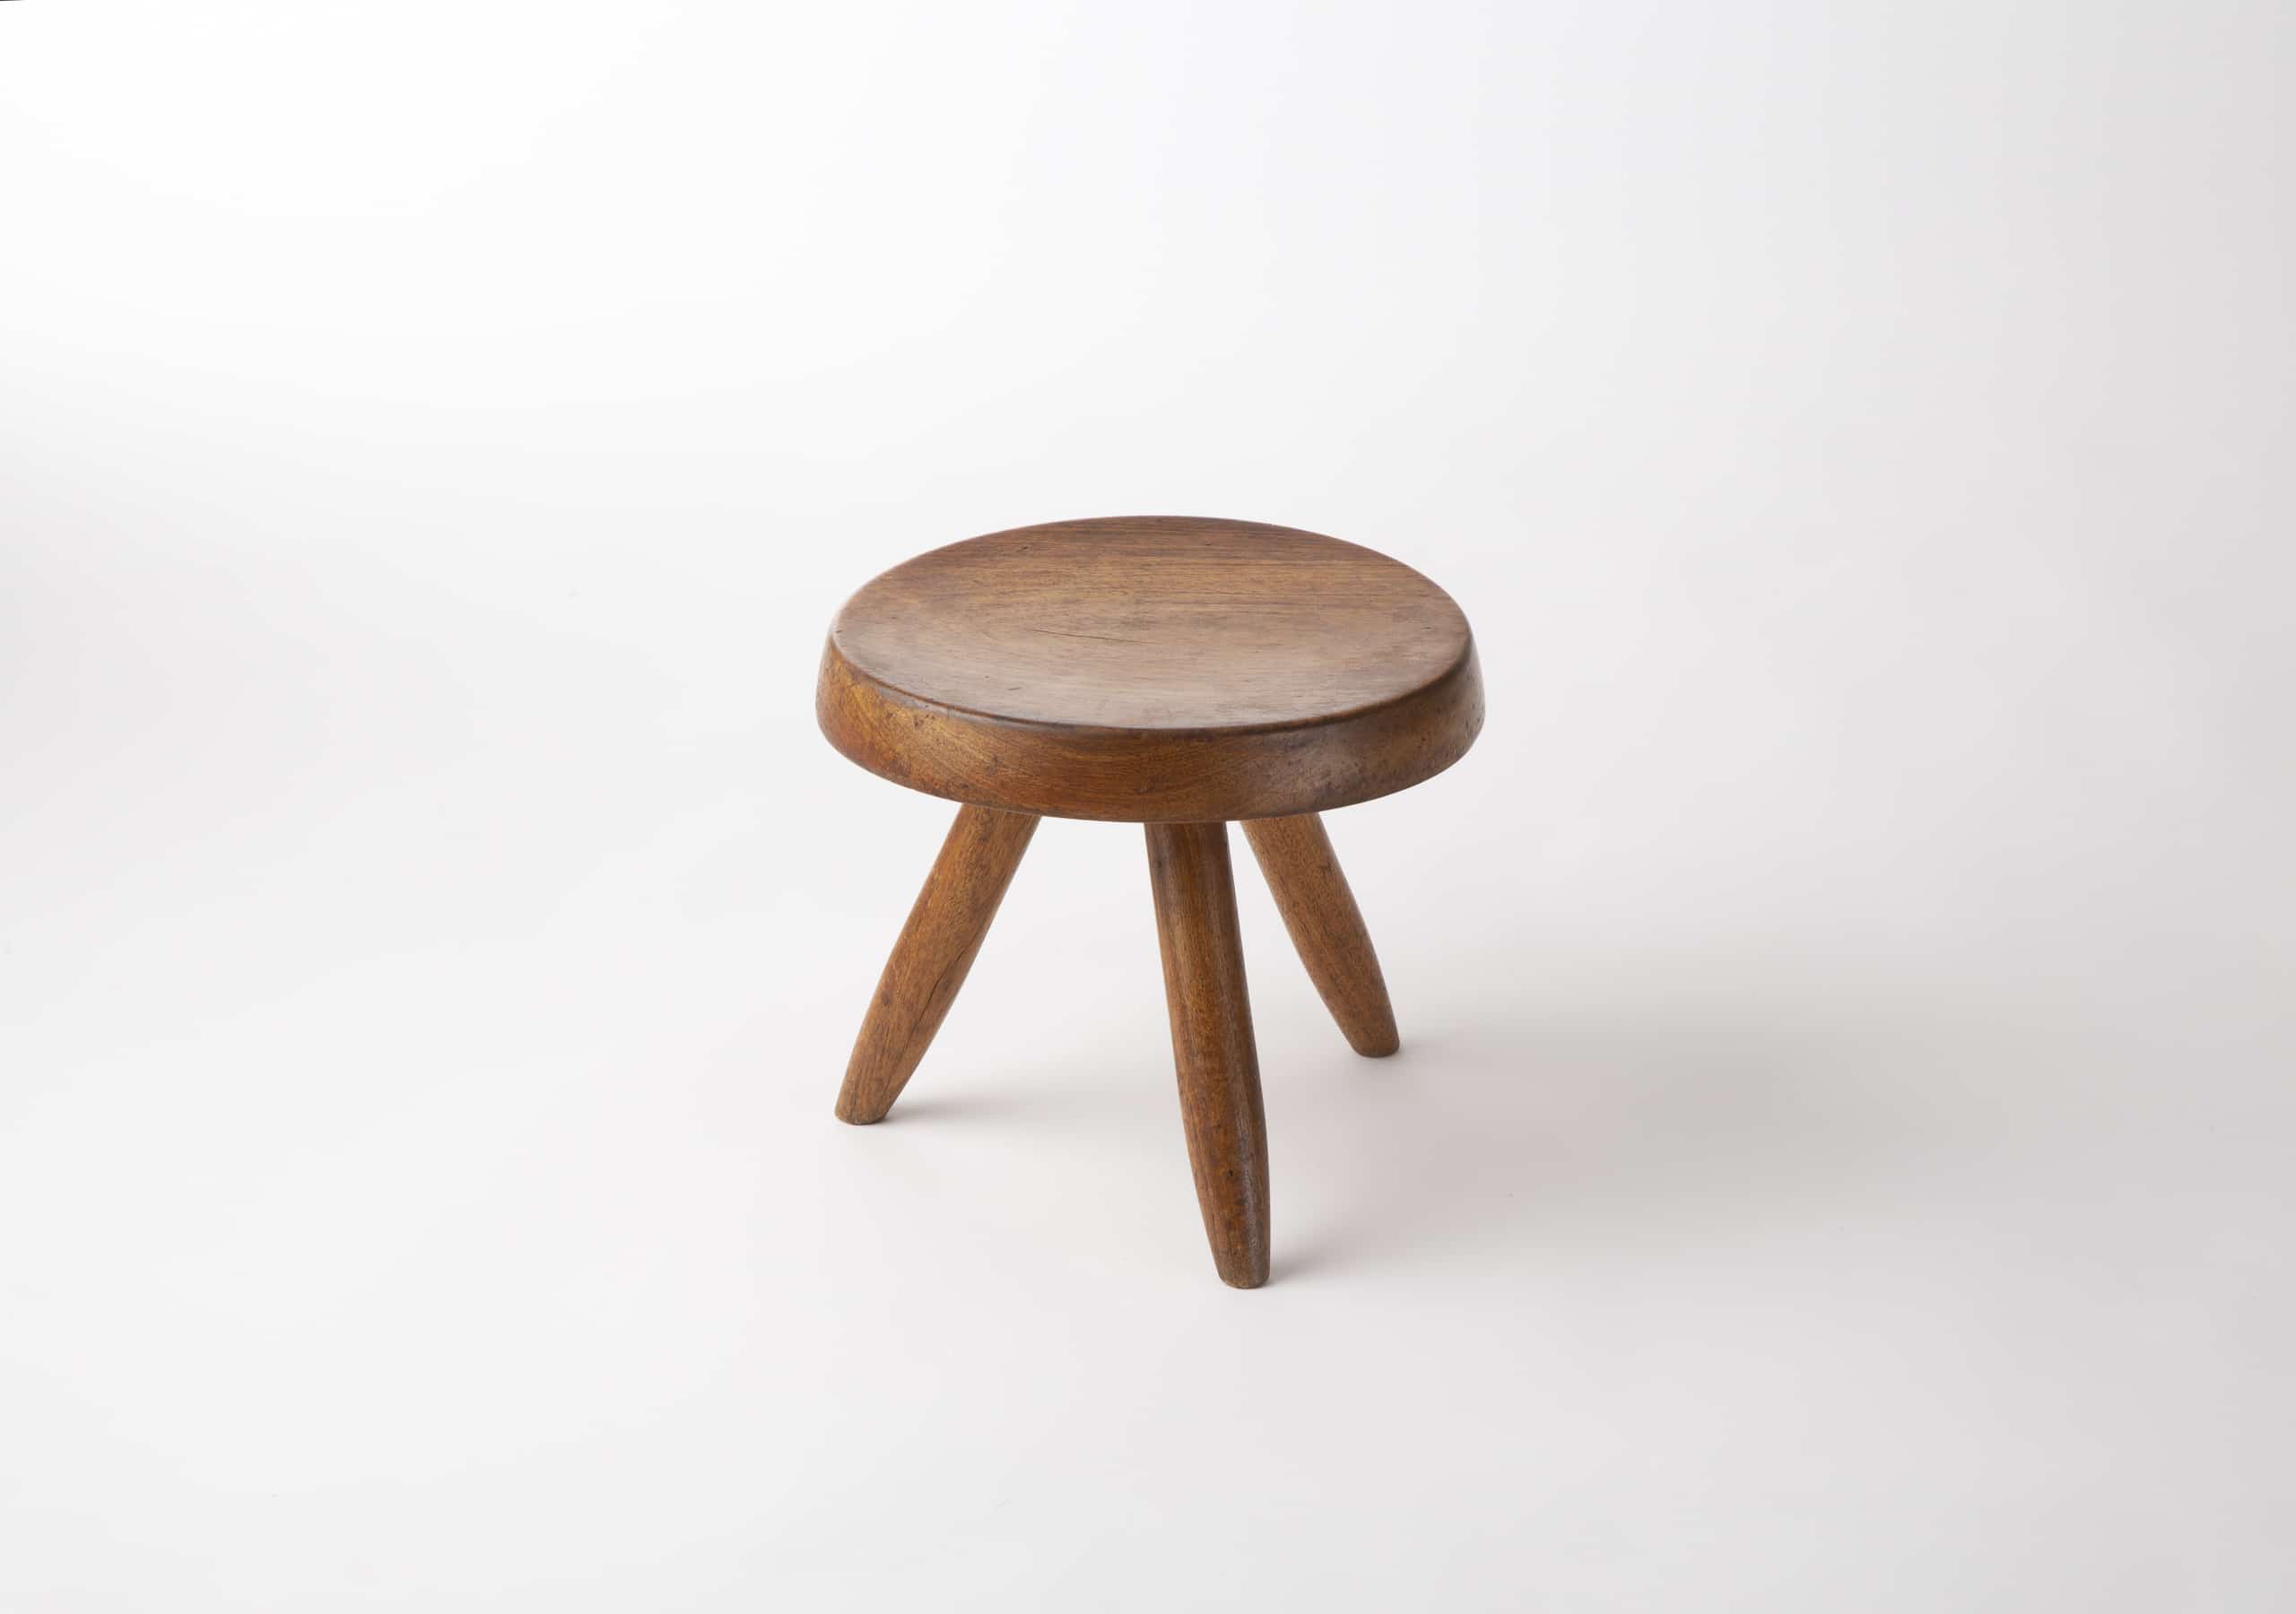 Berger stool by Charlotte Perriand